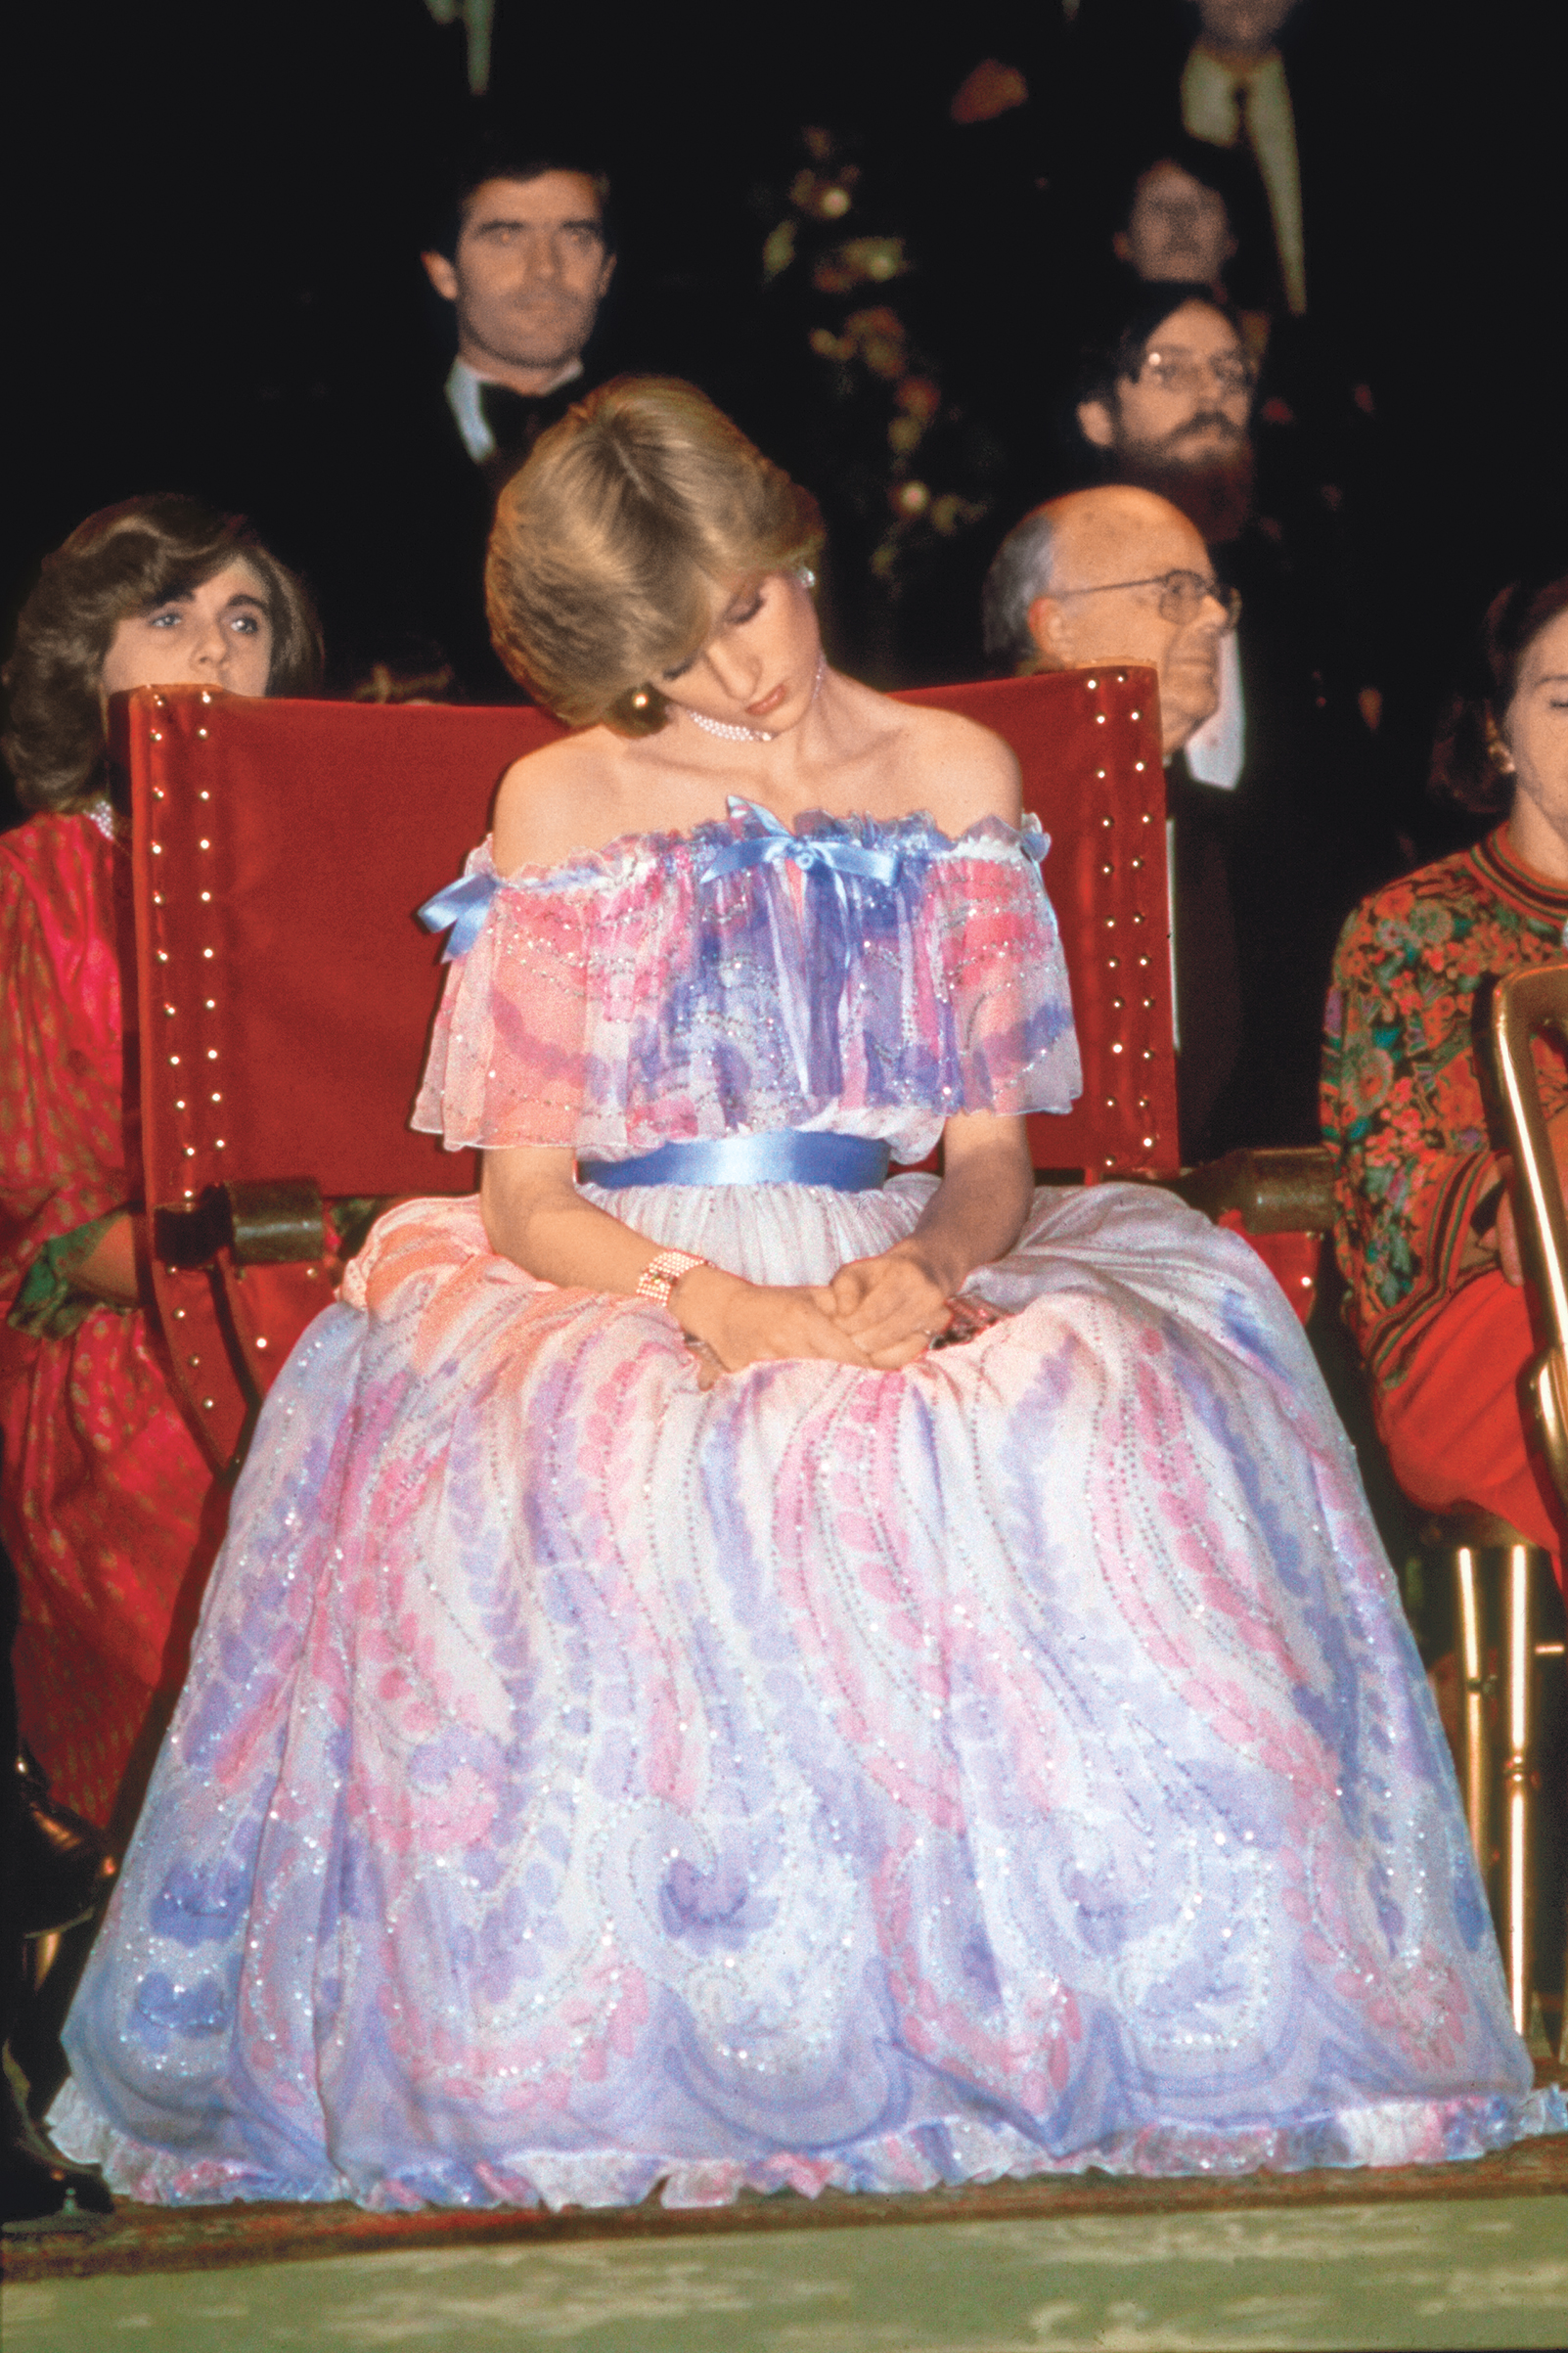 Princess Diana At The Victoria And Albert Museum For The Splendours Of The Gonzagas Exhibition Gala Wearing A Pale Blue Chiffon Evening Dress Designed By Fashion Designers Bellville Sassoon. The Princess Seemed Tired During The Event And The Following Day The Palace Announced Her Pregnancy.